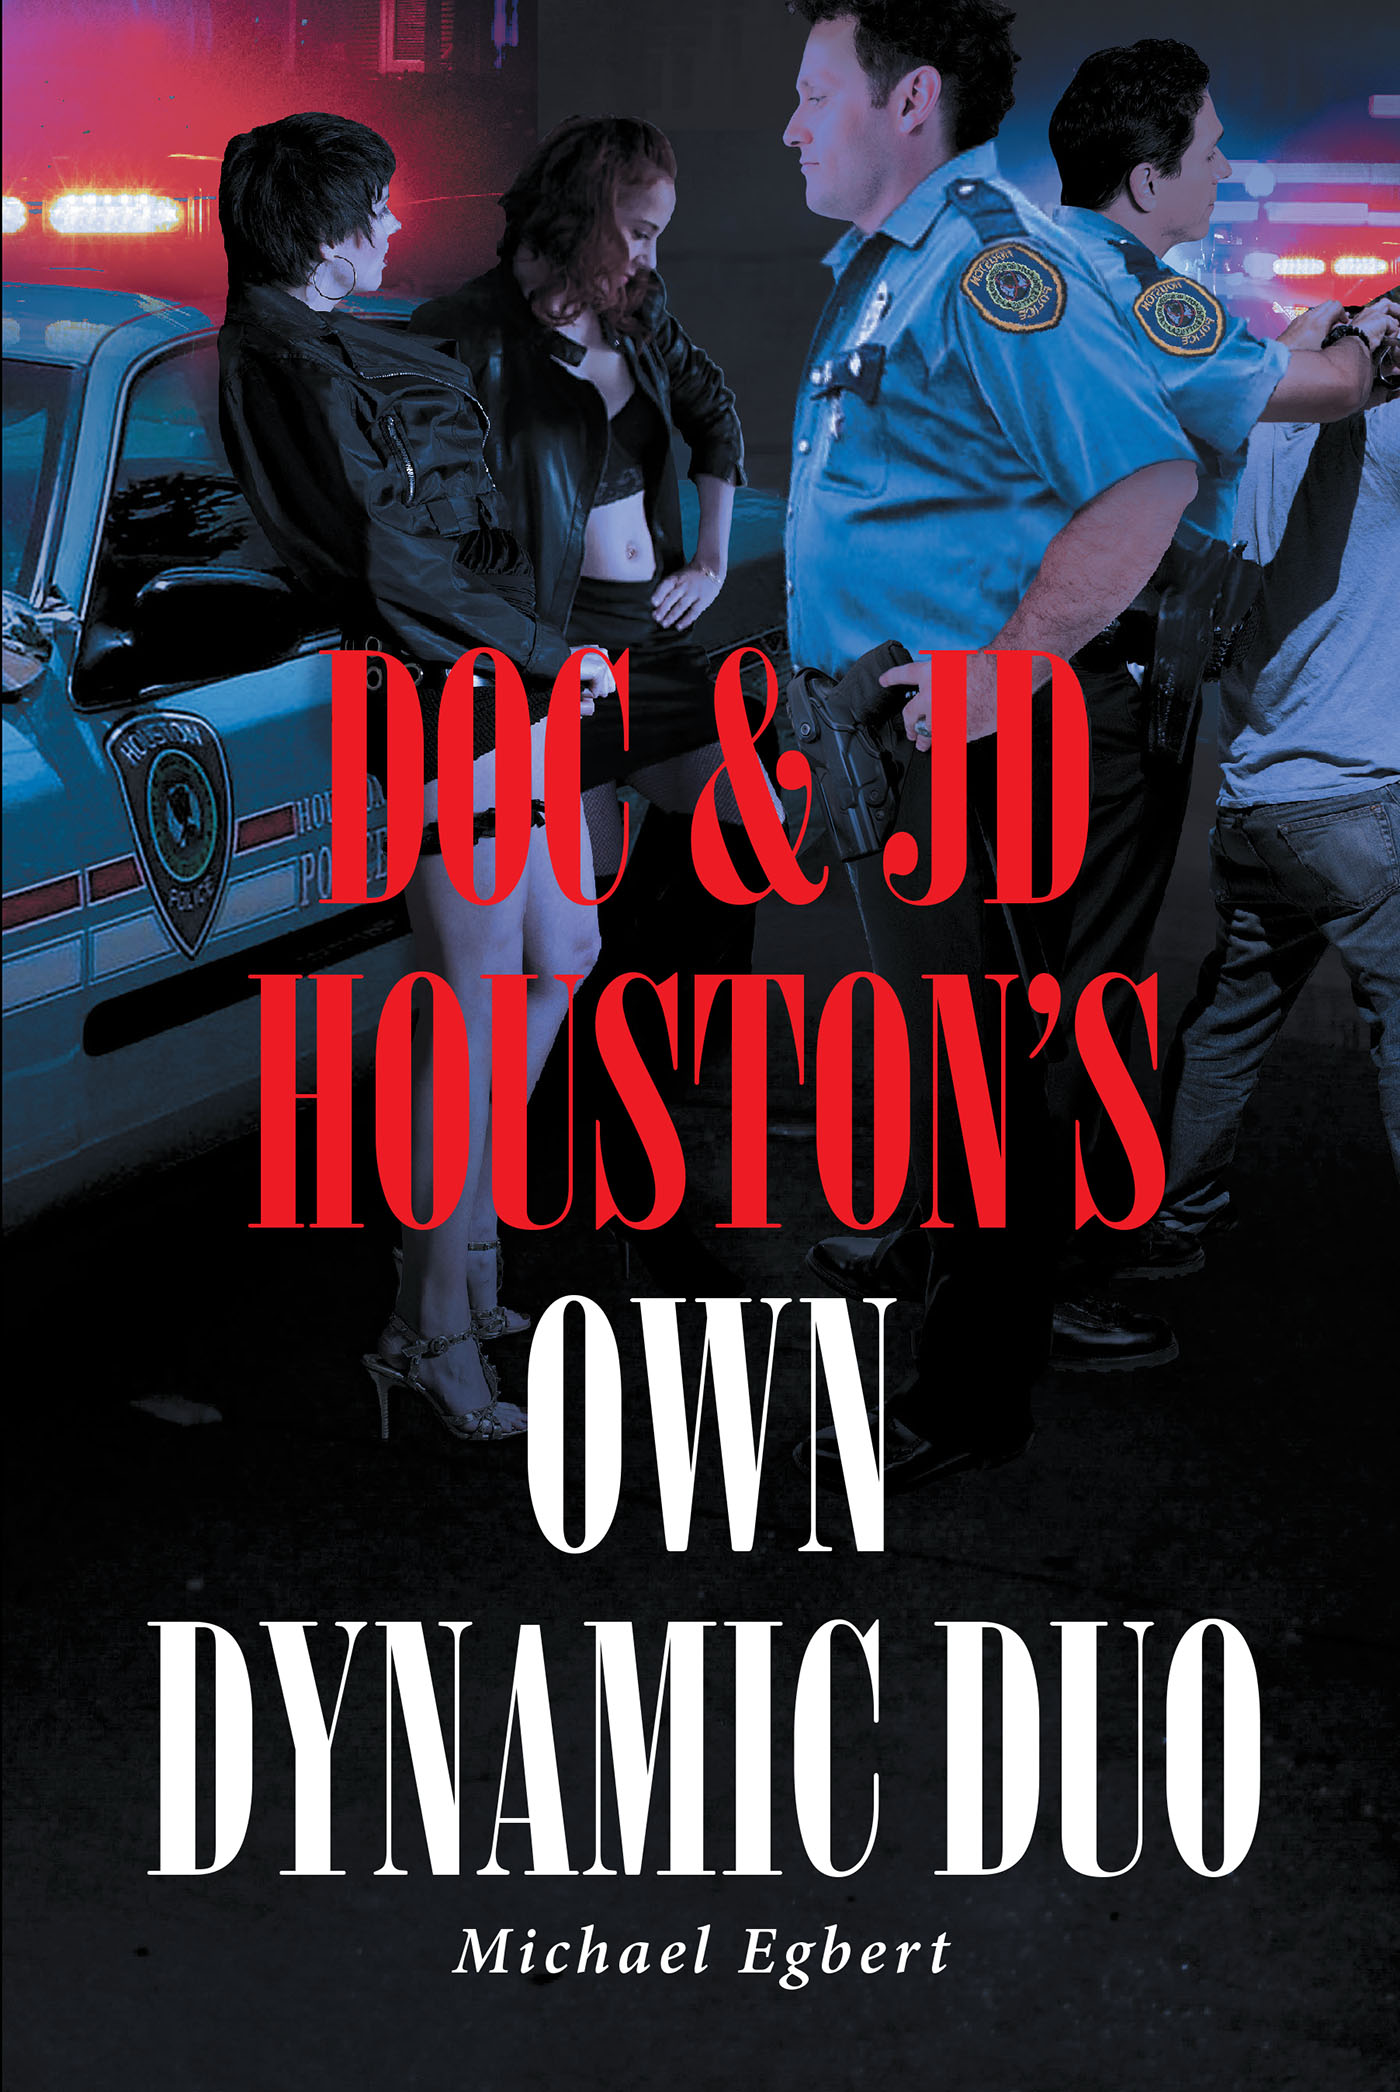 Doc & JD Houston's Own Dynamic Duo Cover Image